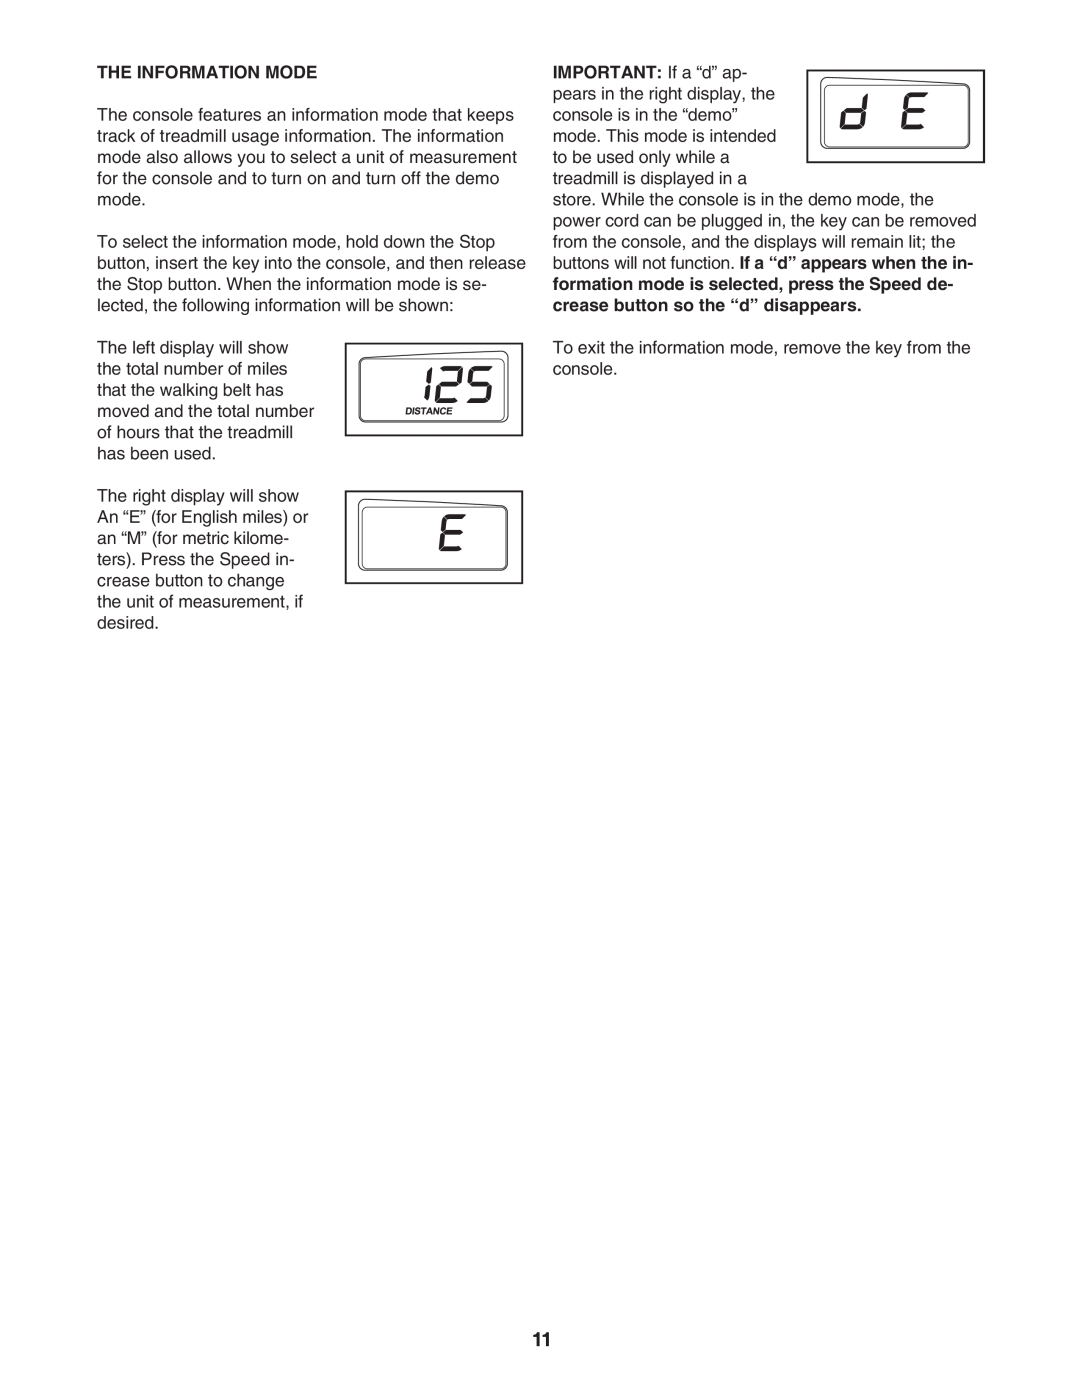 Image IMTL41205.0 user manual The Information Mode 